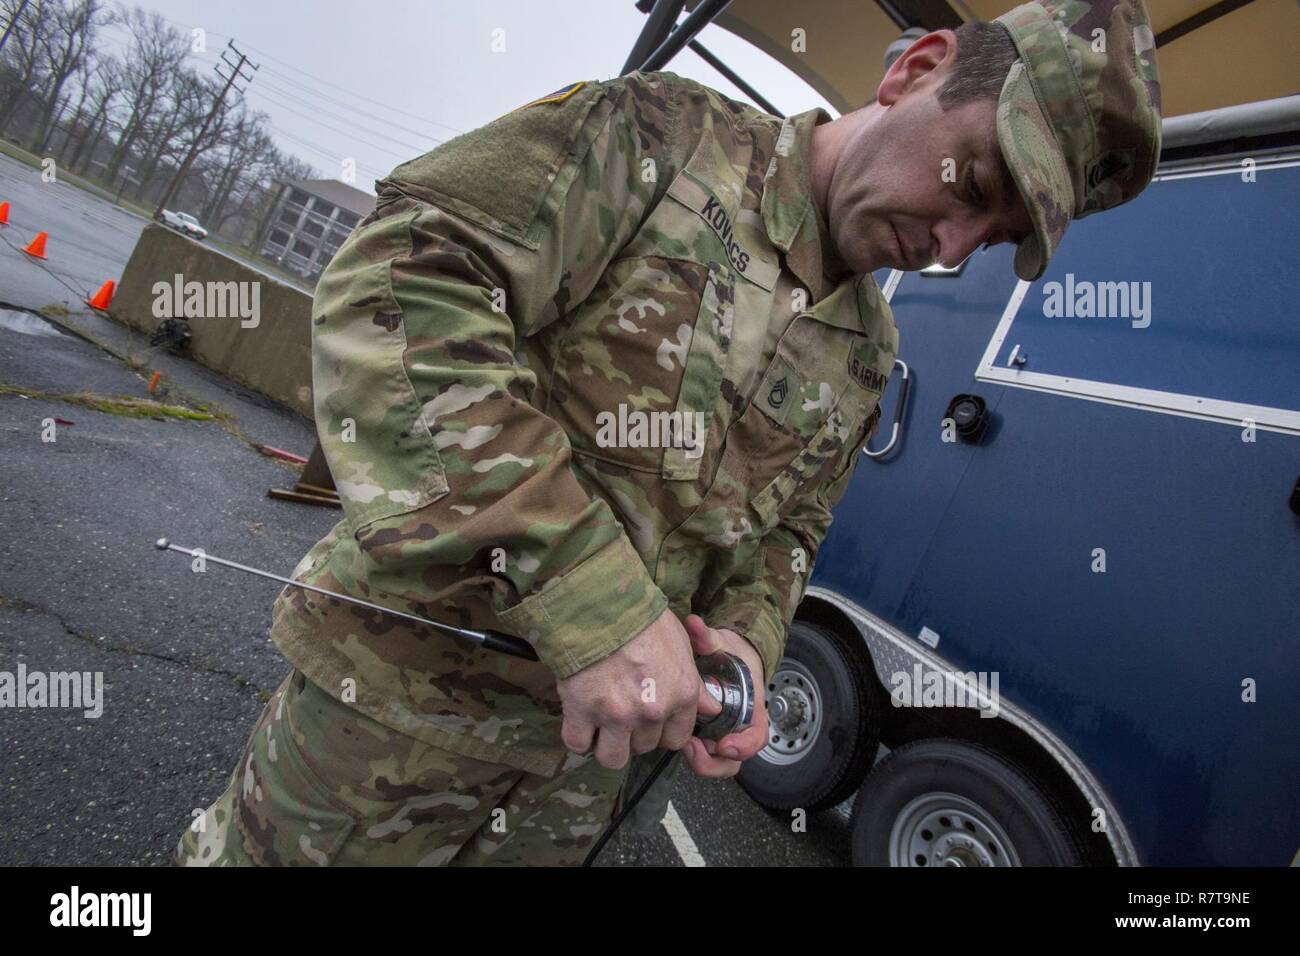 Sgt. 1st Class Steve B. Kovacs with the New Jersey National Guard's 21st Weapons of Mass Destruction-Civil Support Team, assembles a communications antenna during a joint training exercise with members of the Monmouth County Hazmat team at Fort Monmouth, N.J., April 6, 2017. The 21st WMD-CST is a joint unit comprised of New Jersey National Guard Soldiers and Airmen whose mission is to support civil authorities by identifying chemical, biological, radiological, and nuclear substances in either man-made or natural disasters. (New Jersey National Guard Stock Photo